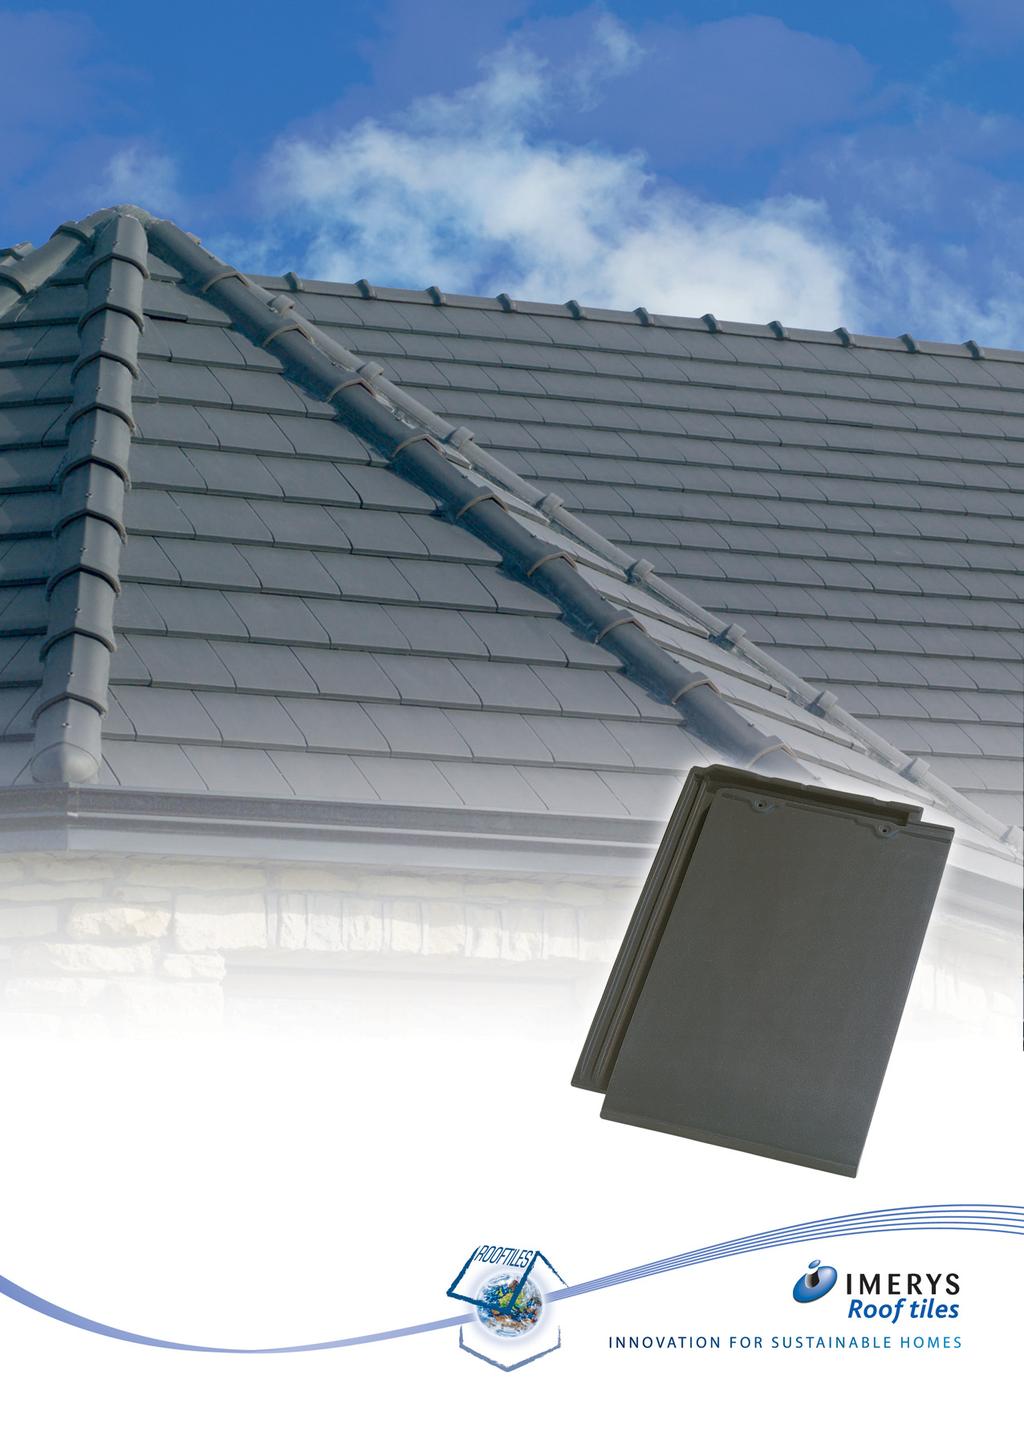 Uniclass IMERYS Environmental Statement L5211 The Imerys Huguenot HP10 Clay Tile Our commitment to sustainable development Cl/SfB (47) Ng2 Large format interlocking clay roof tiles IMERYS has a